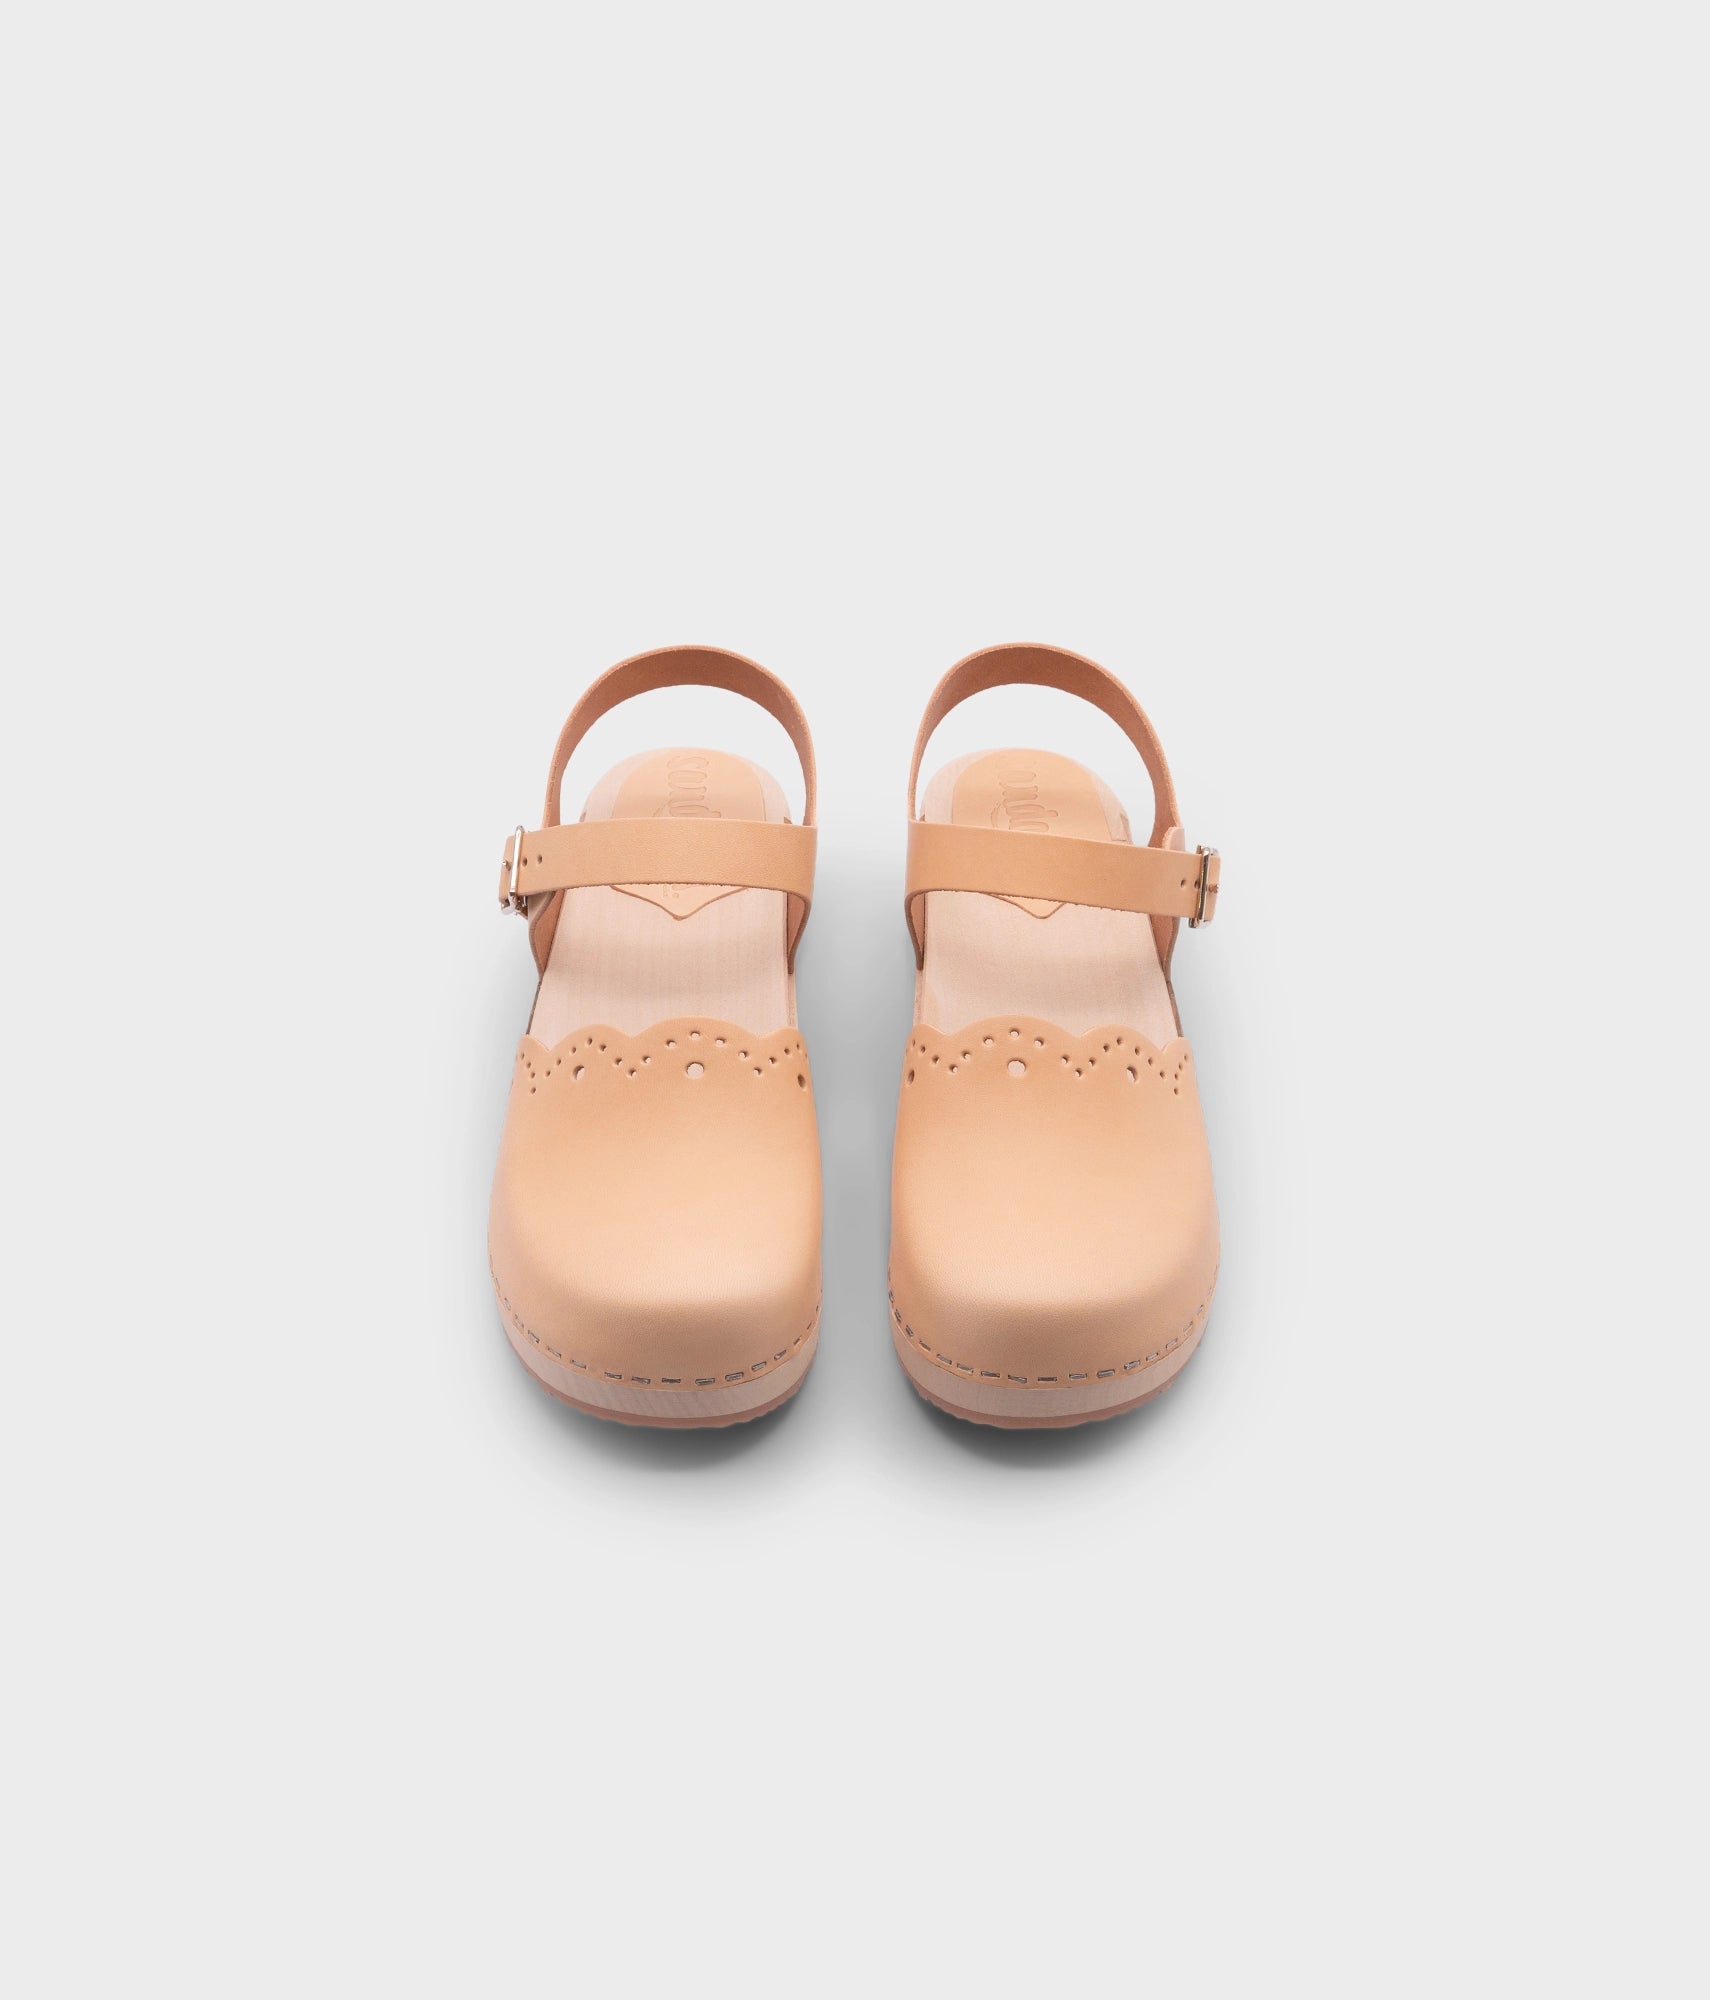 low heeled closed-toe clog sandals in ecru beige vegetable tanned leather with a wavy leather cutout stapled on a light wooden base